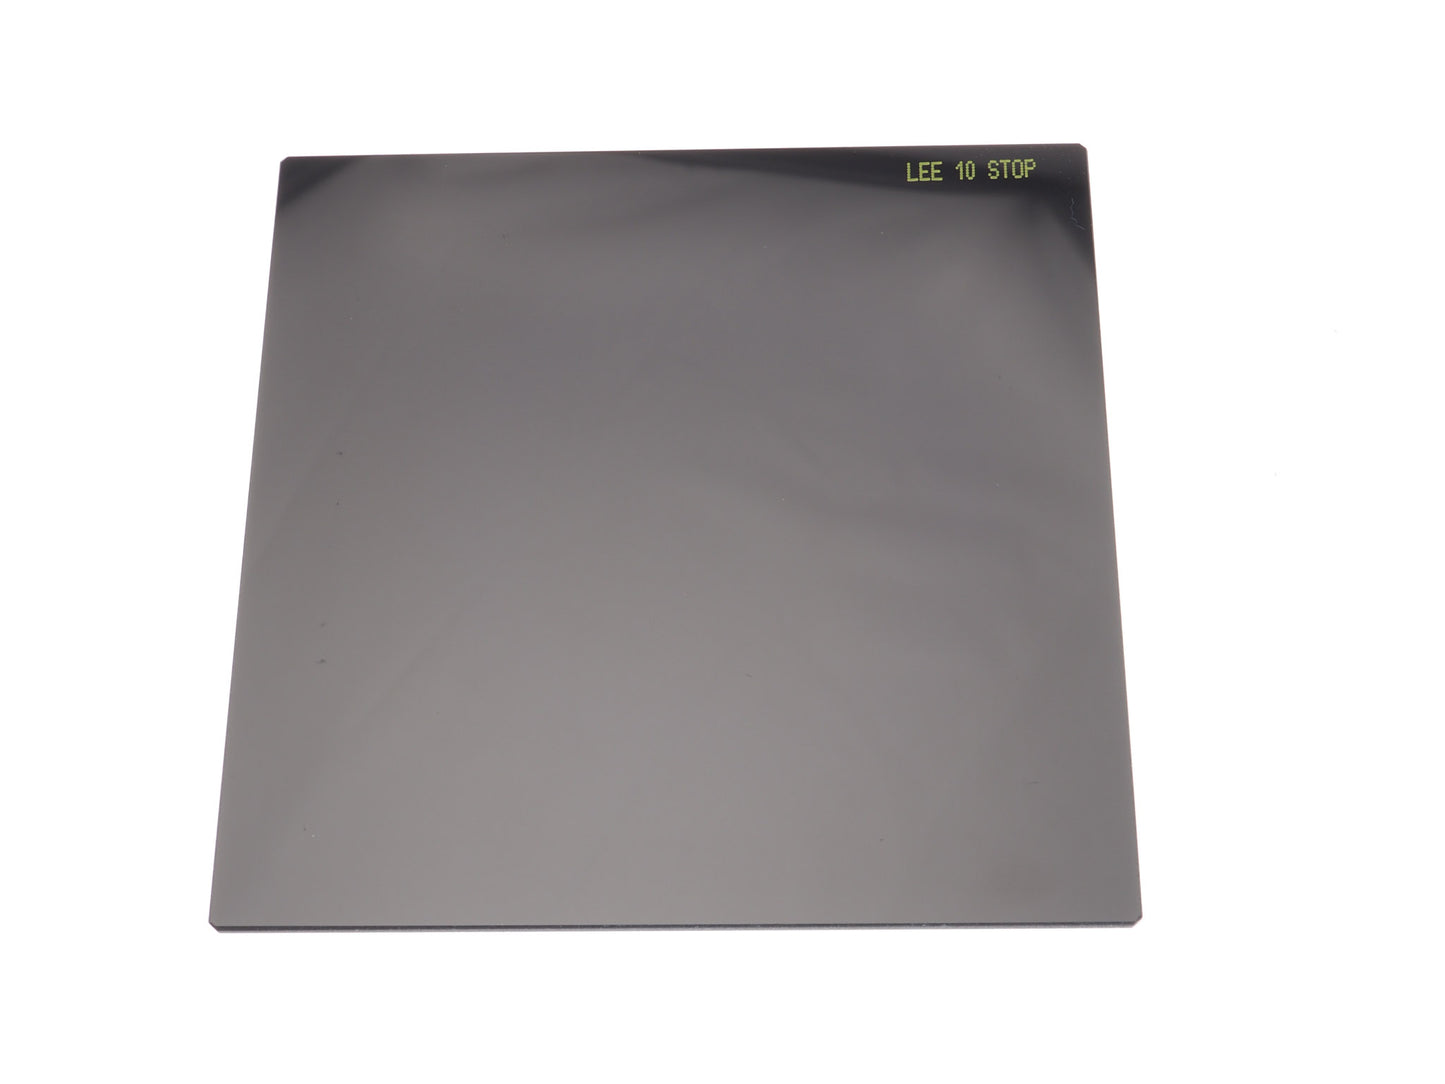 LEE Filters 100x100mm Neutral Density Filter "Big Stopper" - Accessory